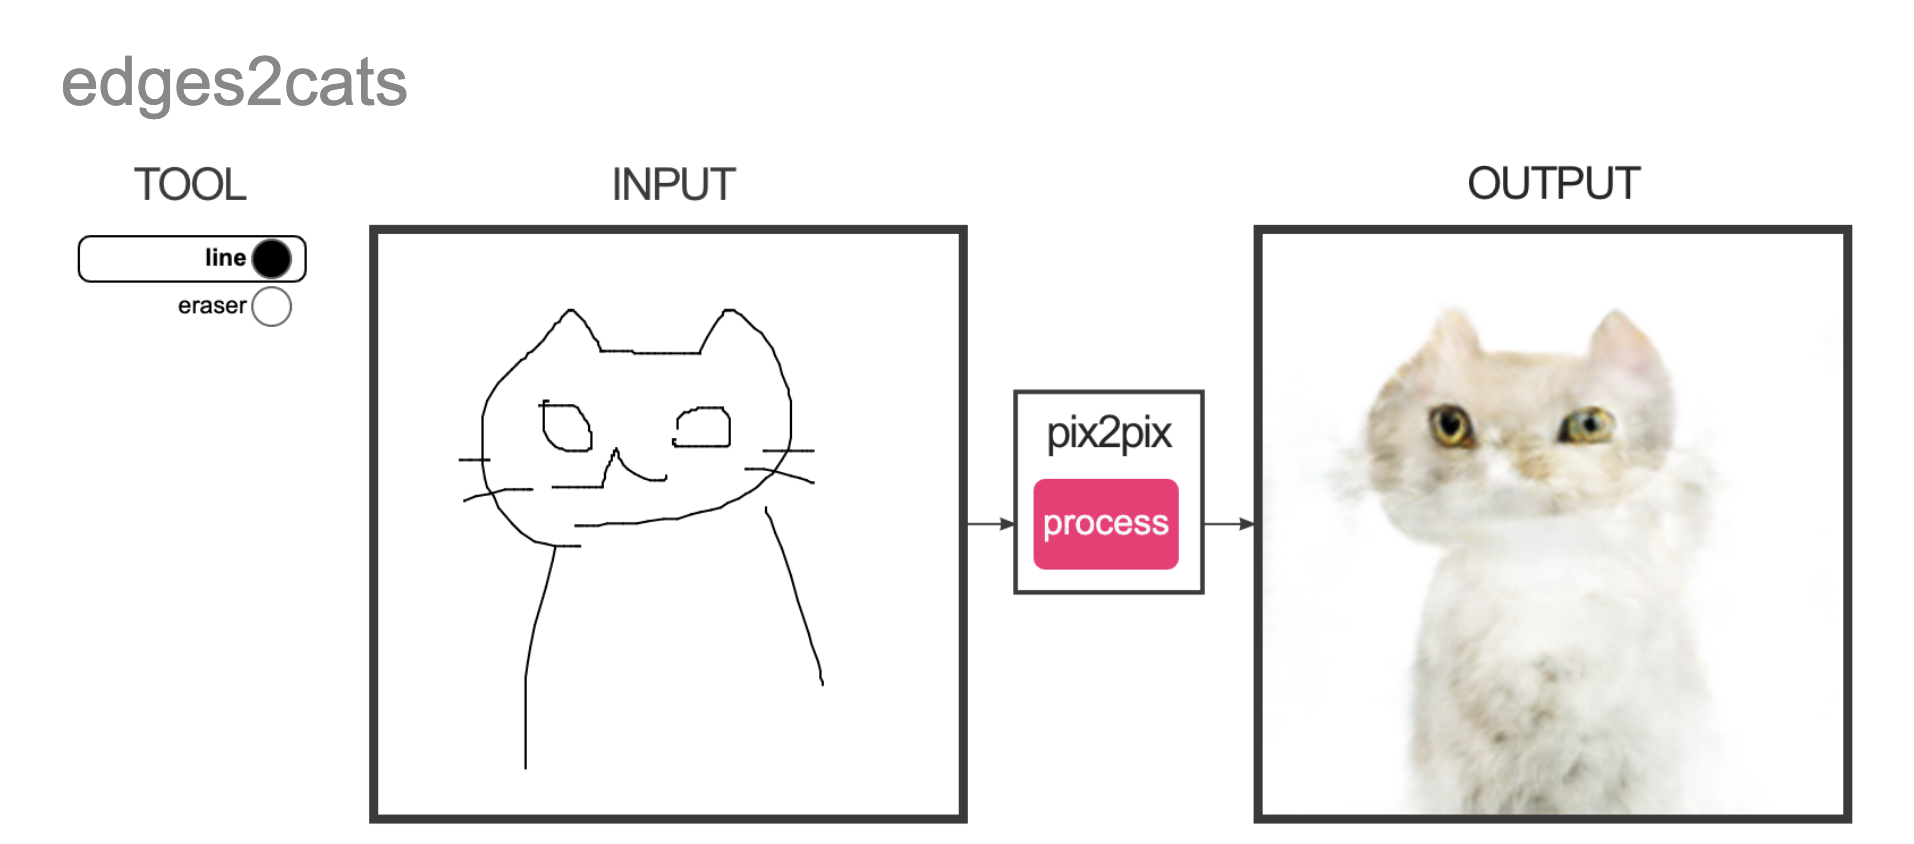 edges2cat demo. on the left is the line art input. on the right is the output of a somewhat realisitcally rendered cat based off the sketch.